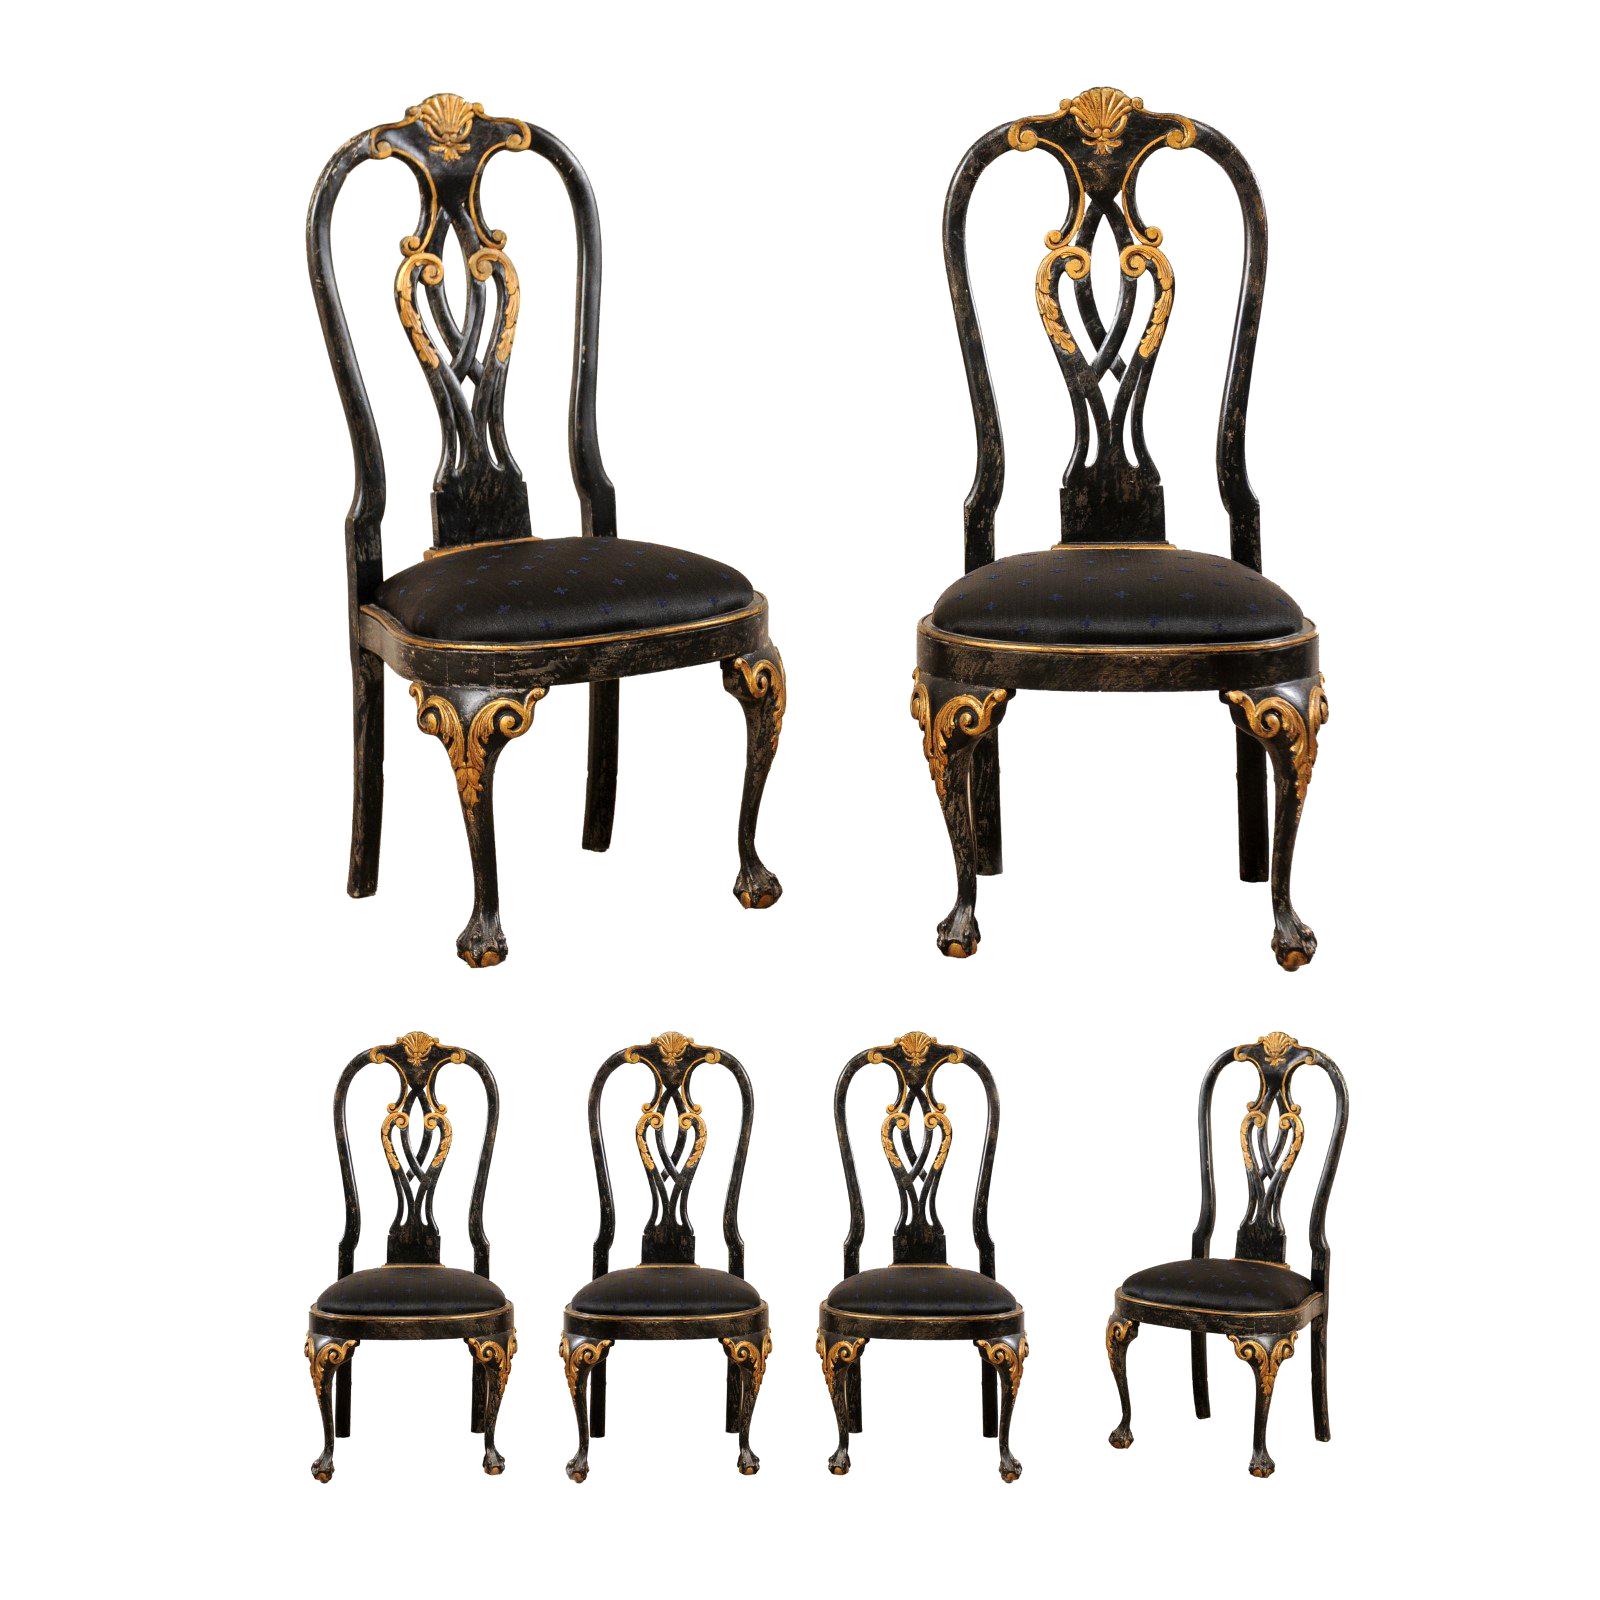 Set of 6 Portuguese-Style Pierced Splat Back Dining Side Chairs, Black & Gold